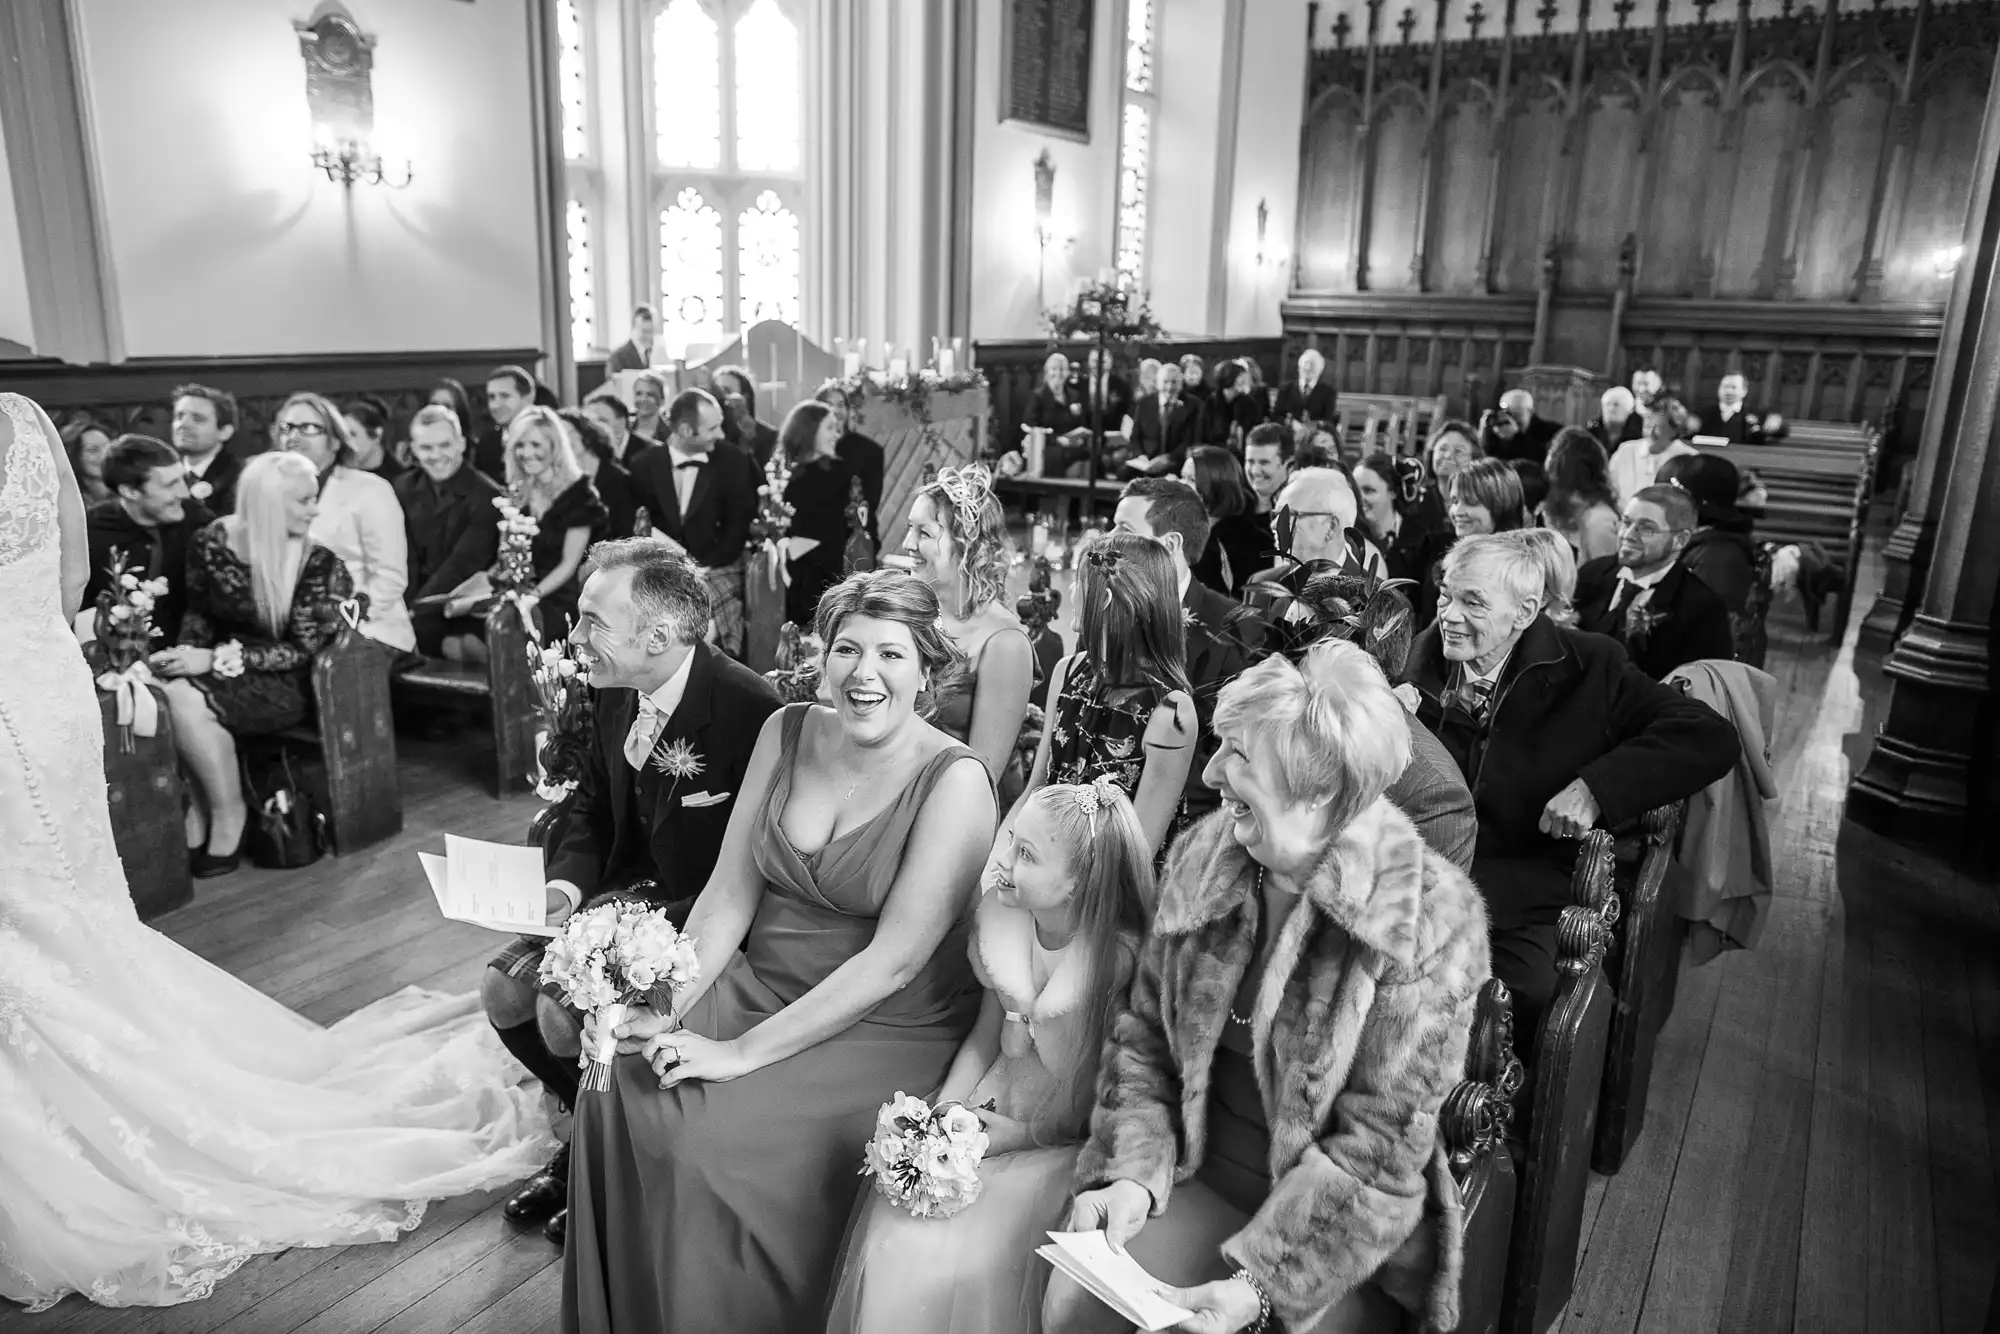 Black and white photo of guests seated at a wedding ceremony inside a church, smiling as they watch the bride standing to the left.